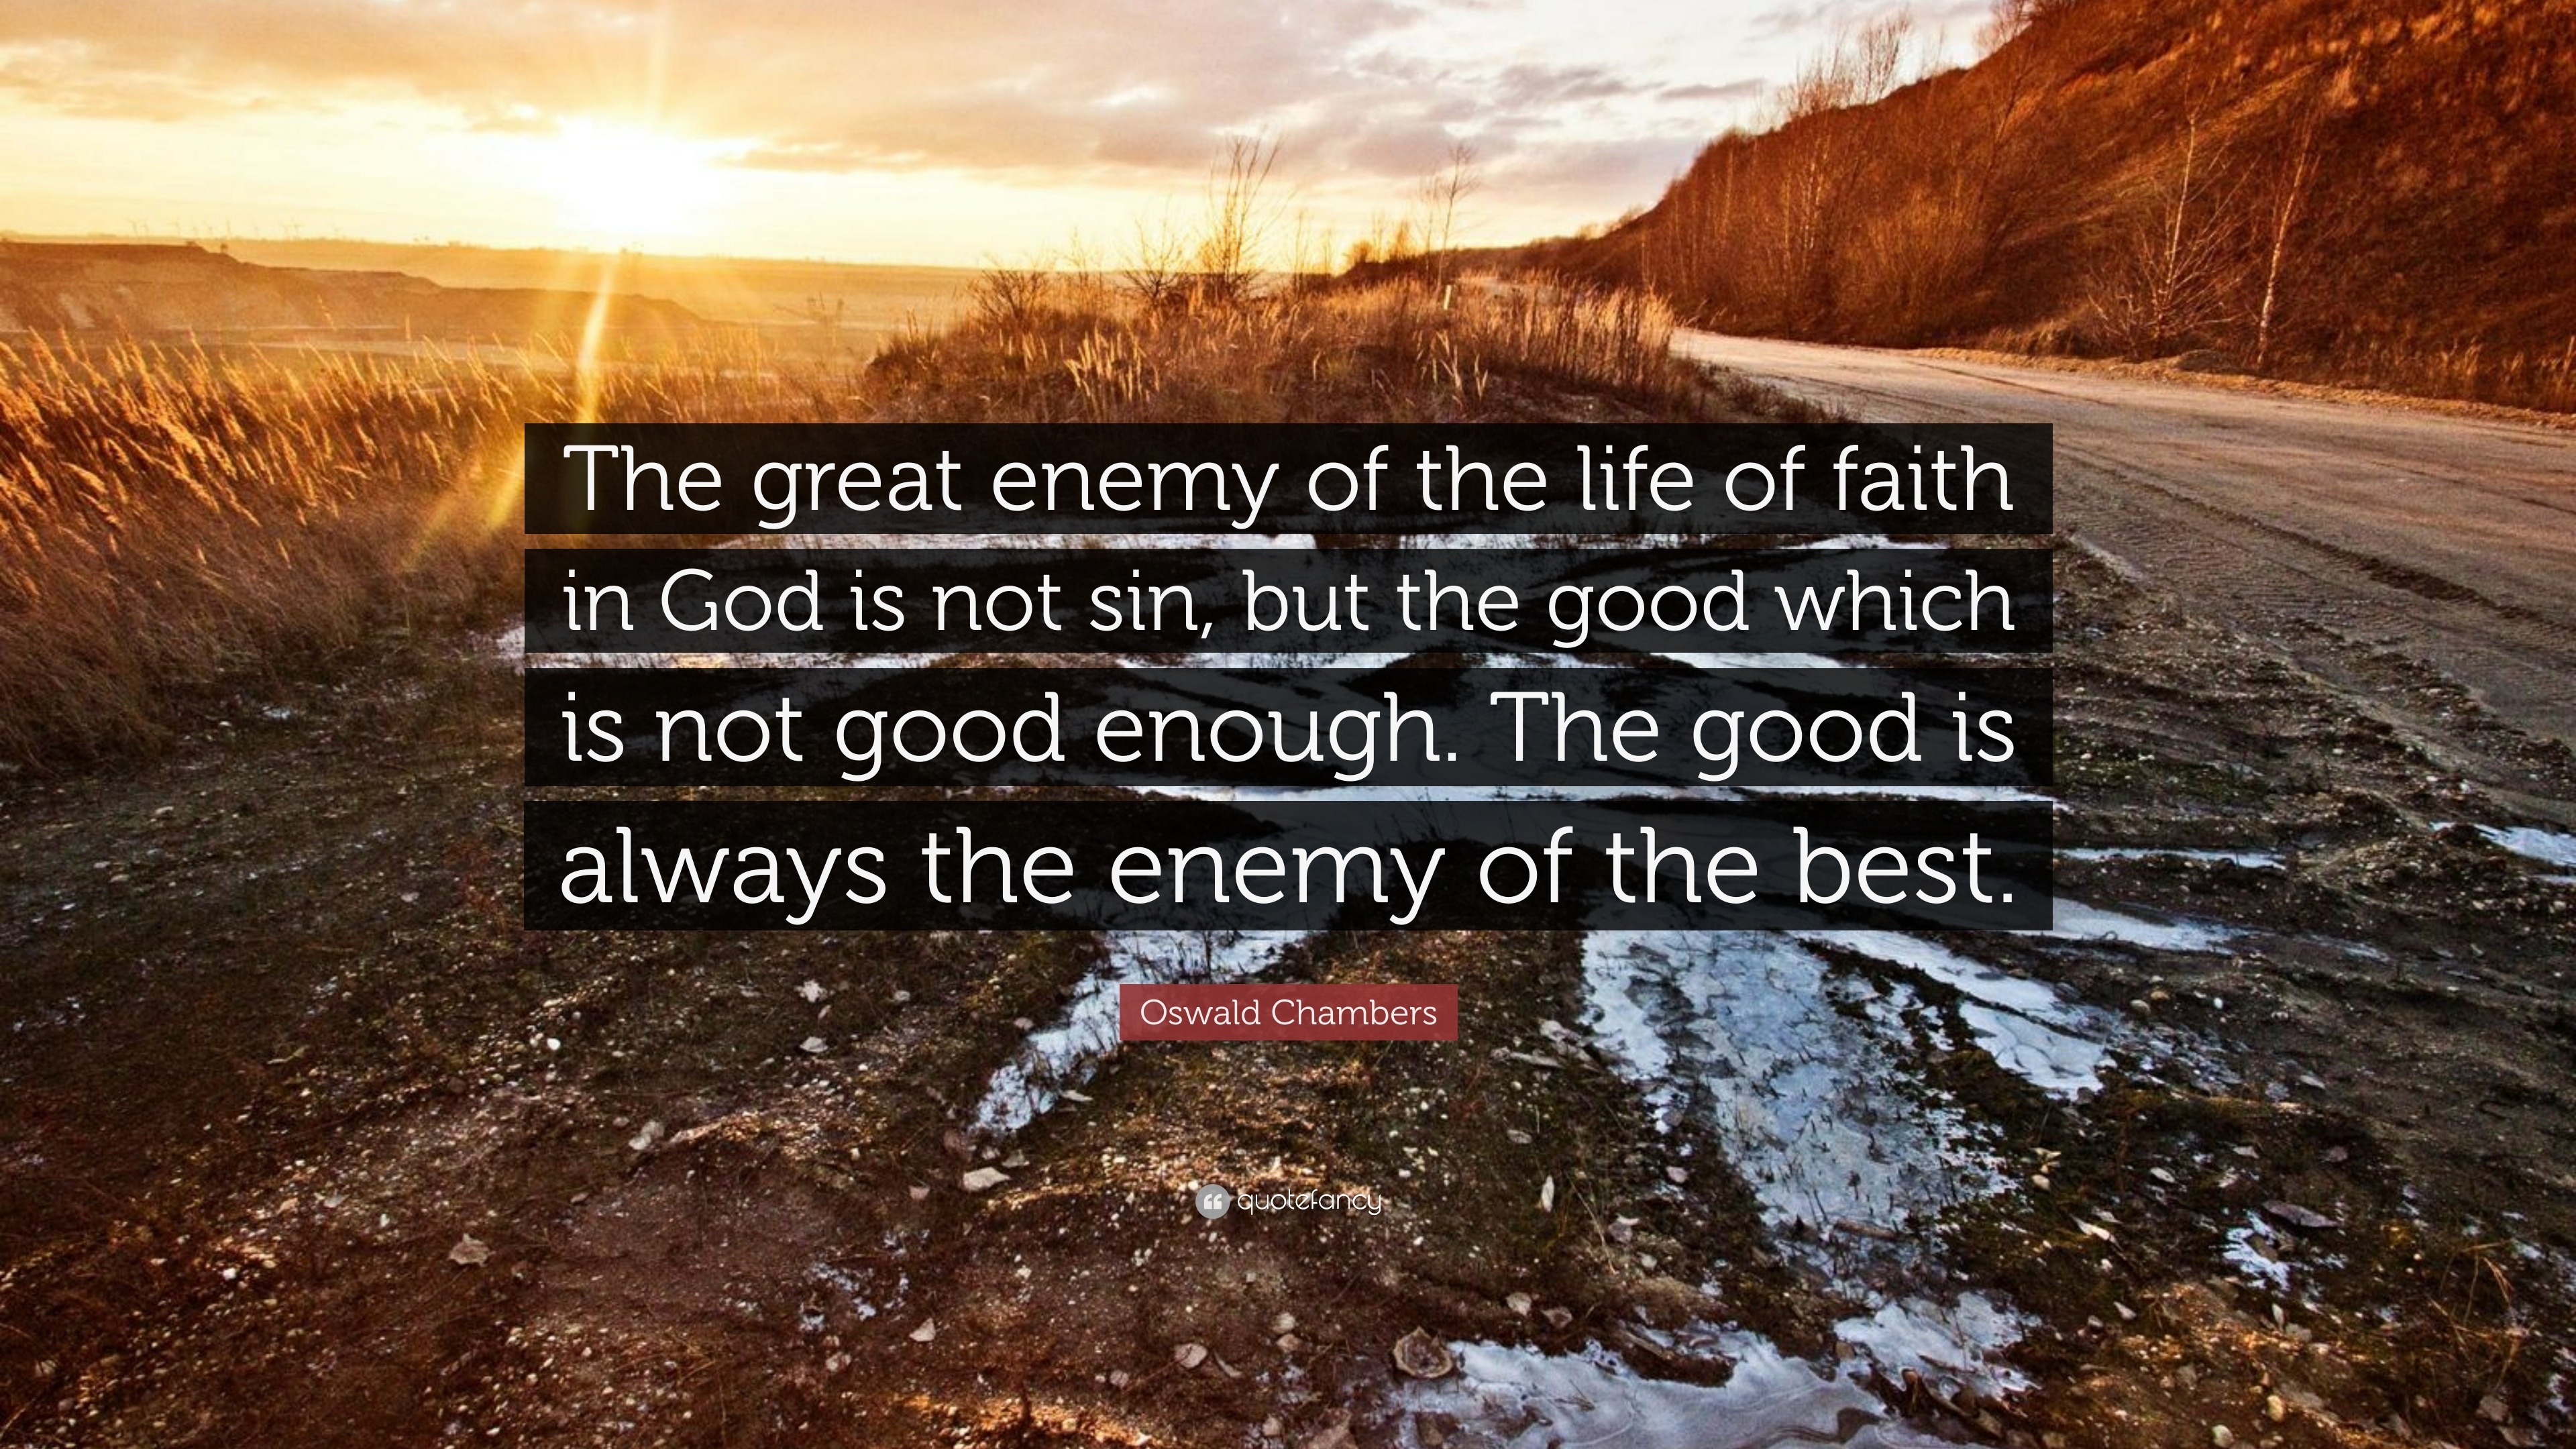 Oswald Chambers Quote “The great enemy of the life of faith in God is